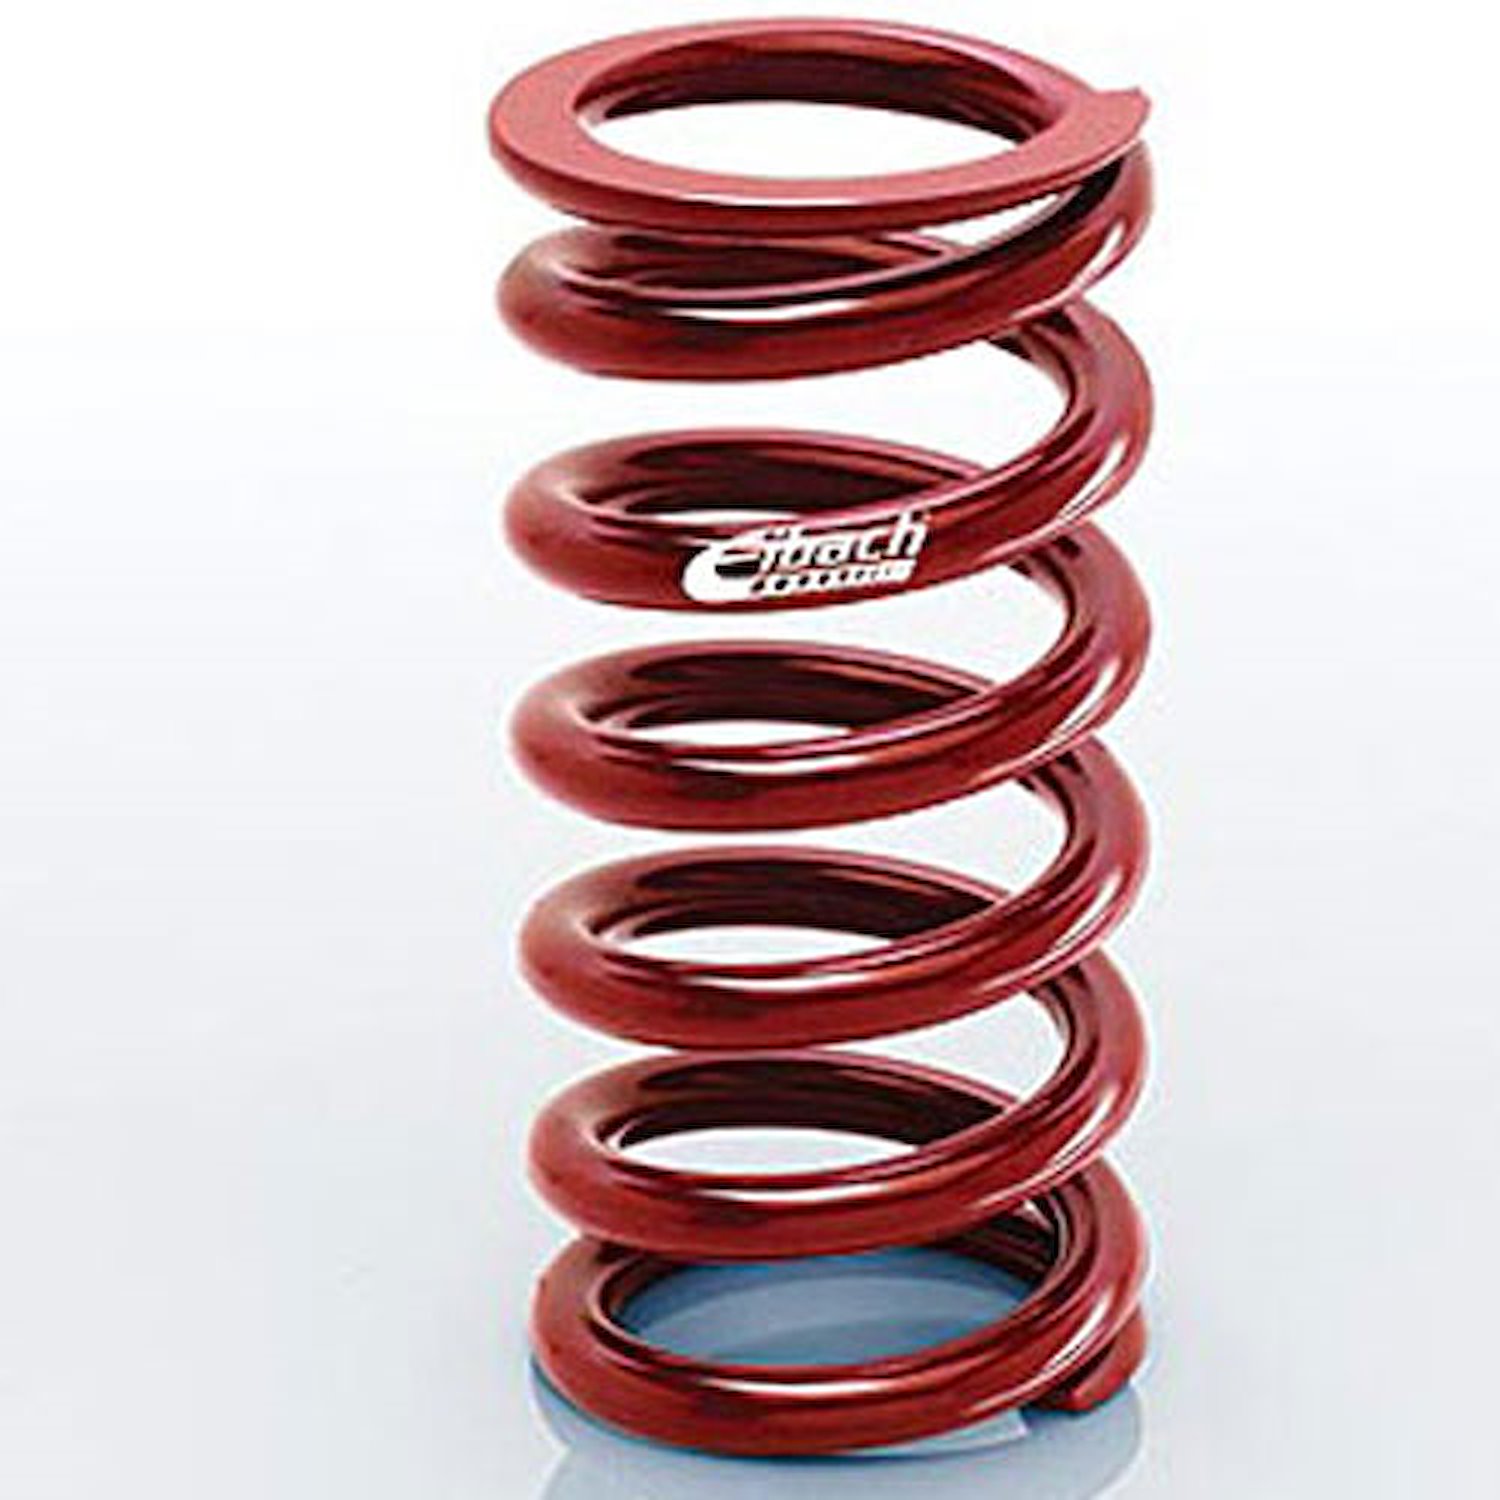 0950.500.0625 EIBACH CONVENTIONAL FRONT SPRING